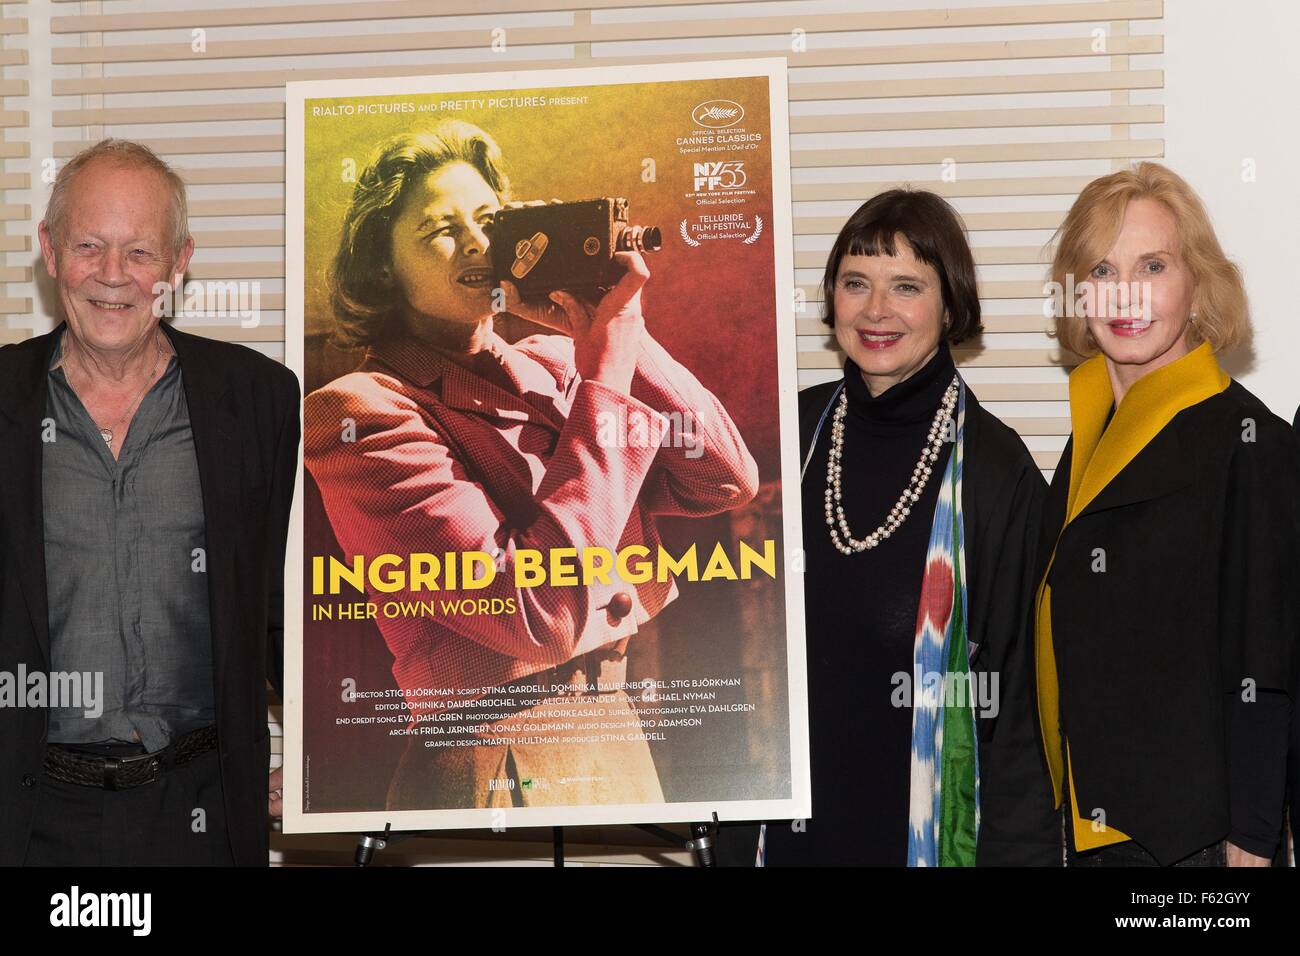 New York, NY, USA. 10th Nov, 2015. Stig Bjorkman, Isabella Rossellini, Pia Lindstrom at arrivals for INGRID BERGMAN: IN HER OWN WORDS Screening Presented by Rialto Pictures and Scandinavia House, Scandinavia House, New York, NY November 10, 2015. Credit:  Jason Smith/Everett Collection/Alamy Live News Stock Photo